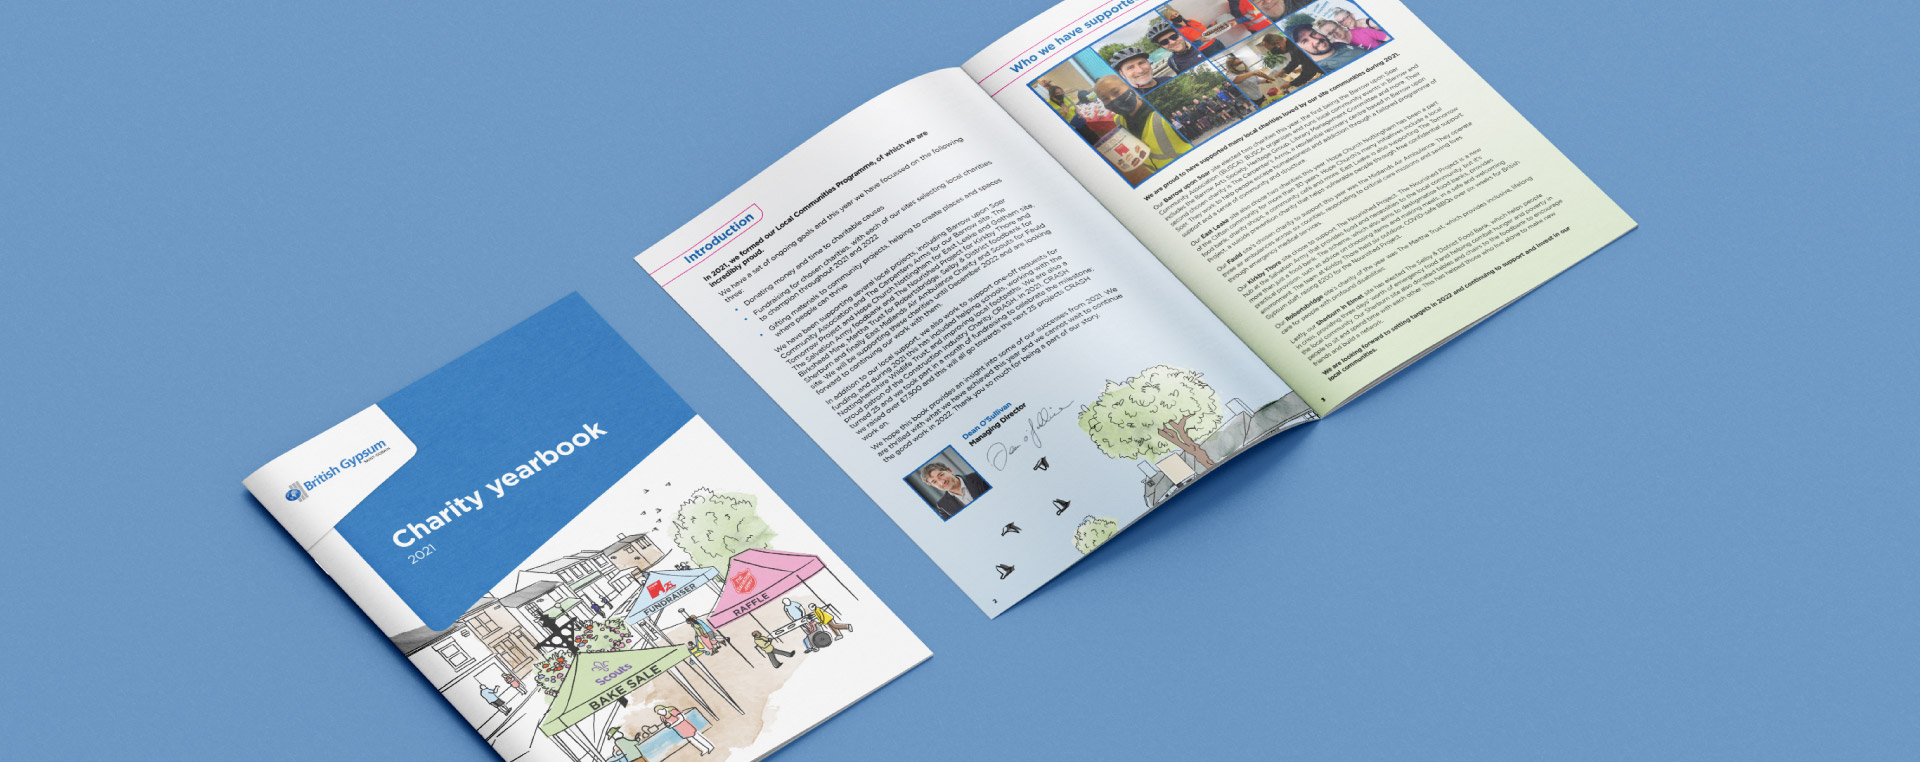 The cover and a spread of the British Gypsum Charity Yearbook